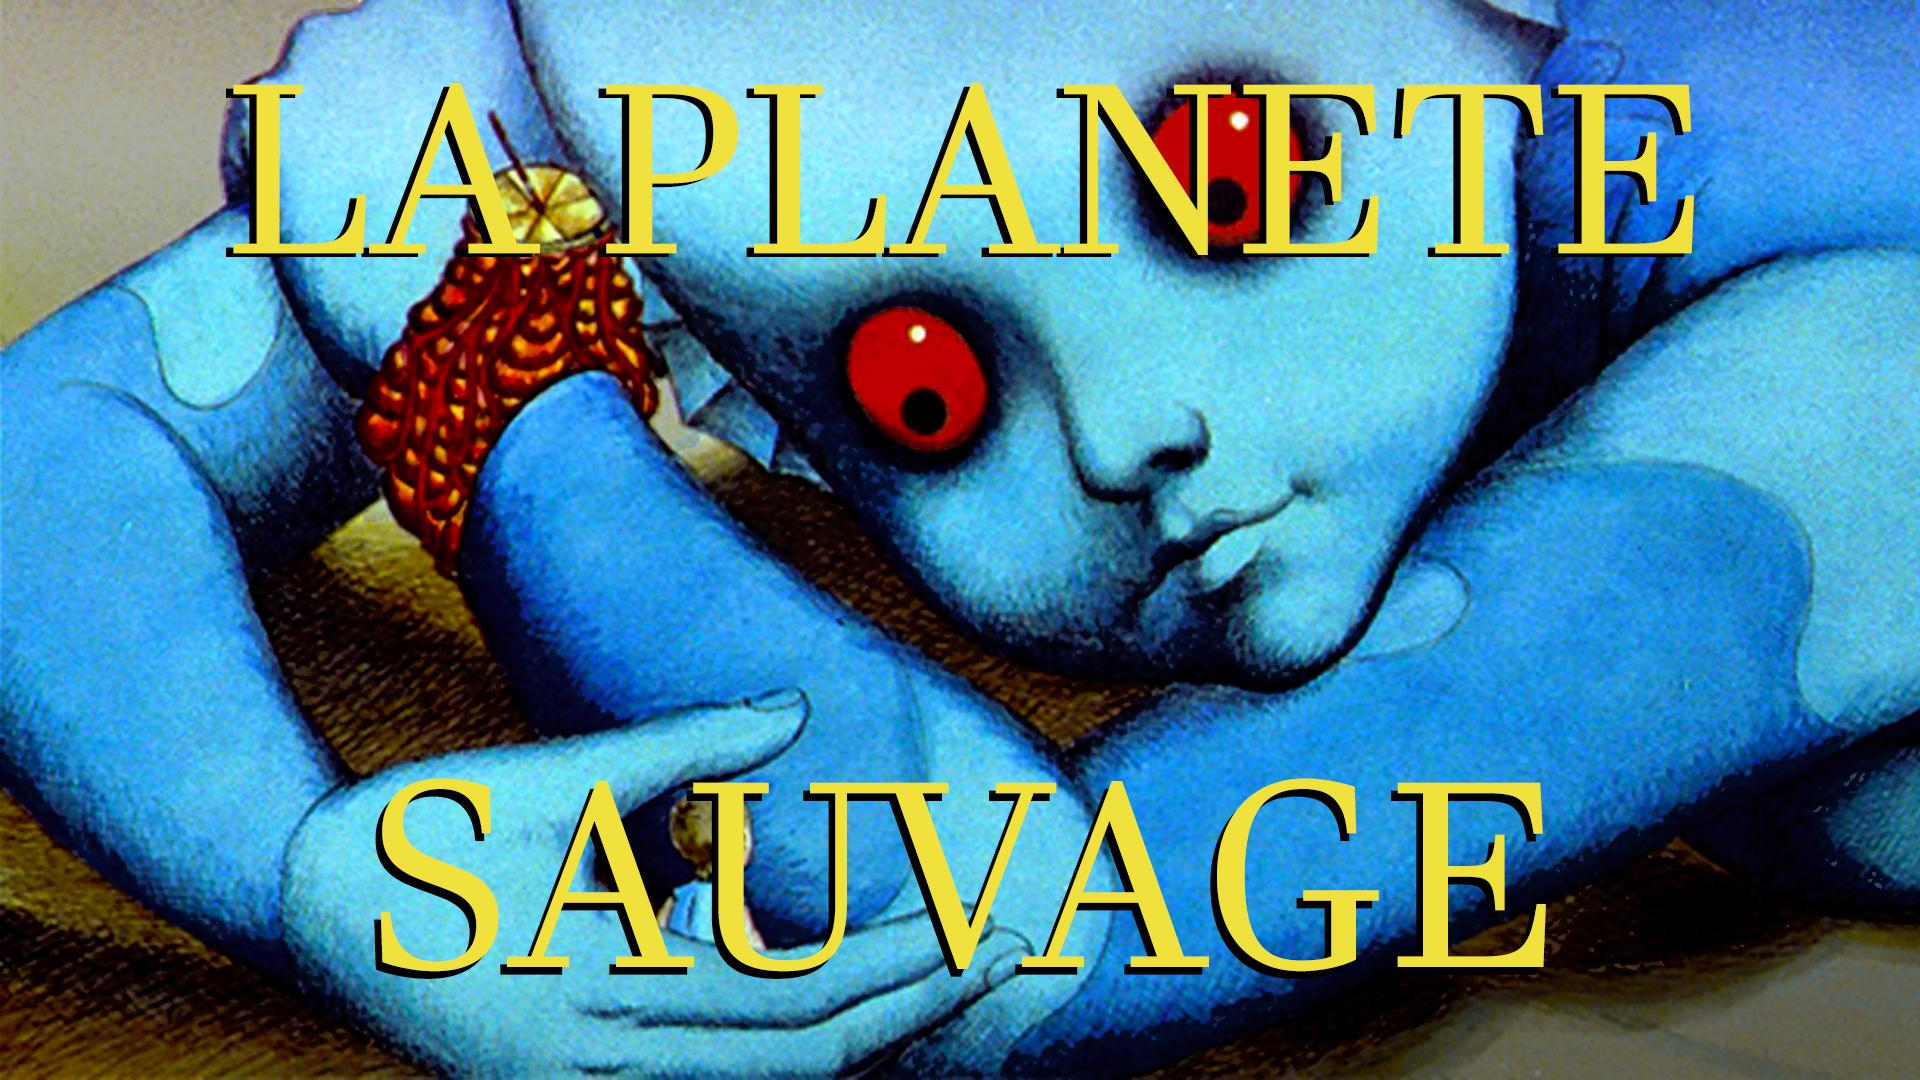 Improved Fantastic Planet Wallpaper. Feel free to use